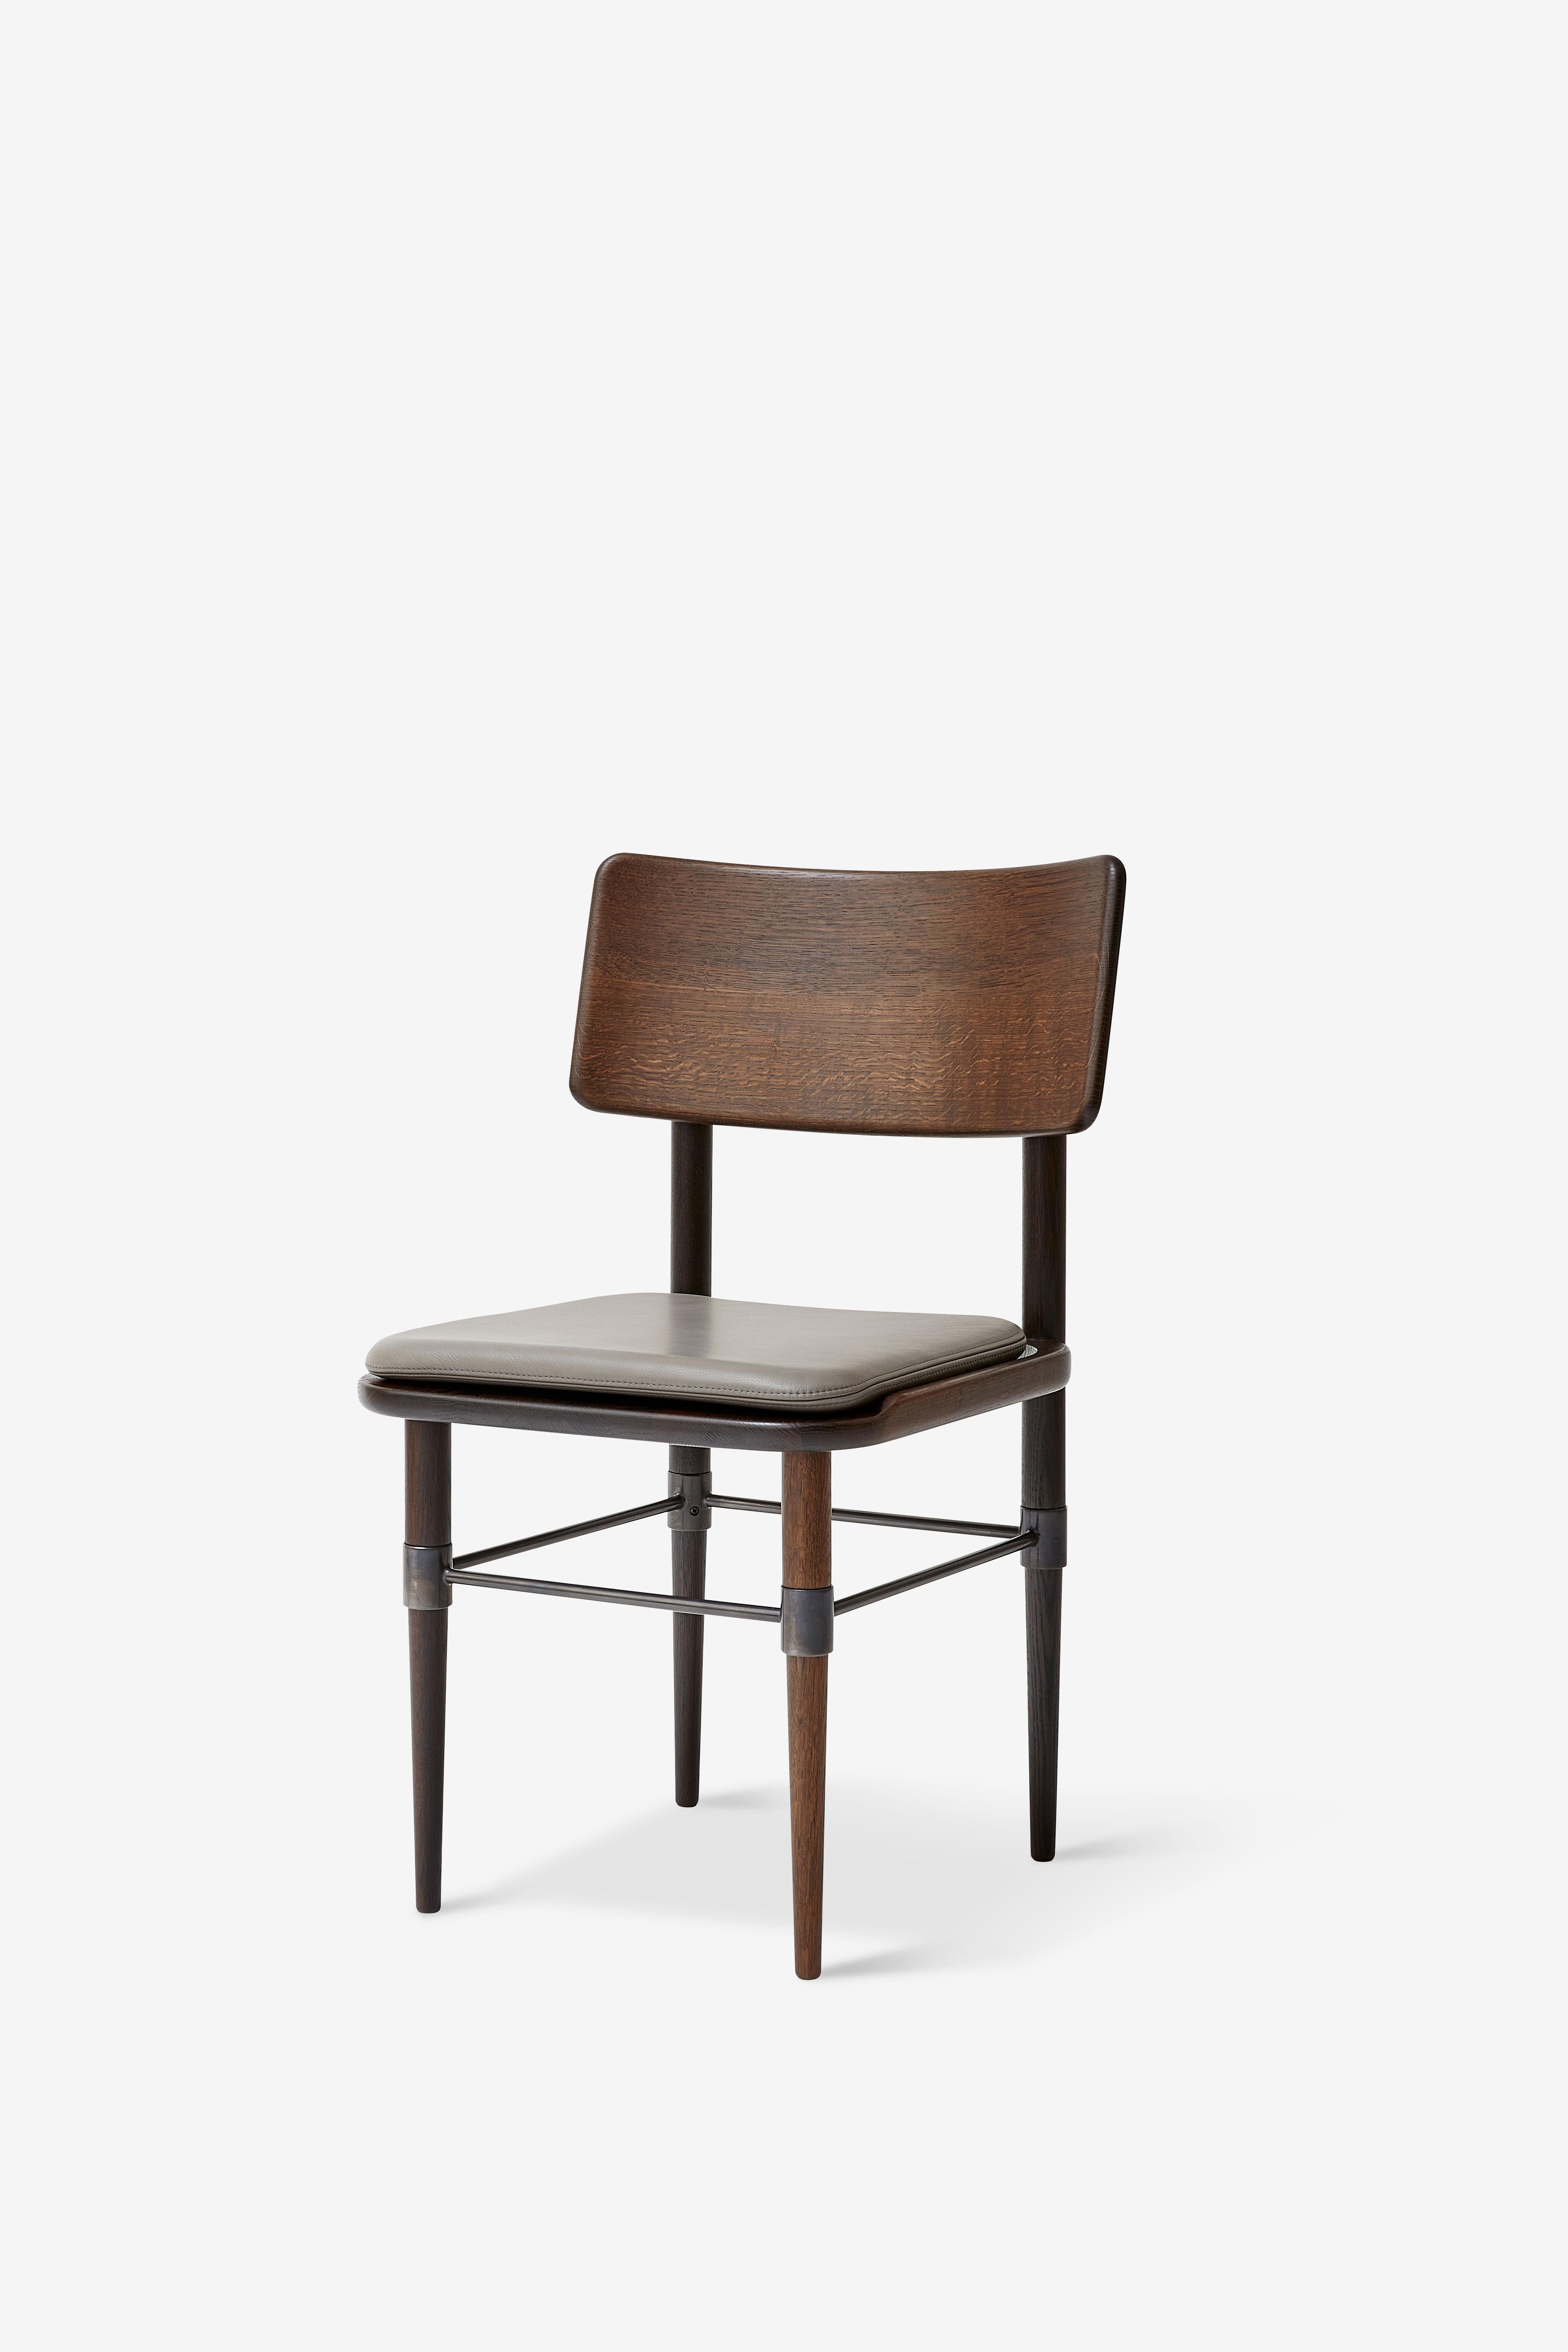 Hand-Crafted MG101 Dining chair in smoked oak by Malte Gormsen Design by Space Copenhagen For Sale